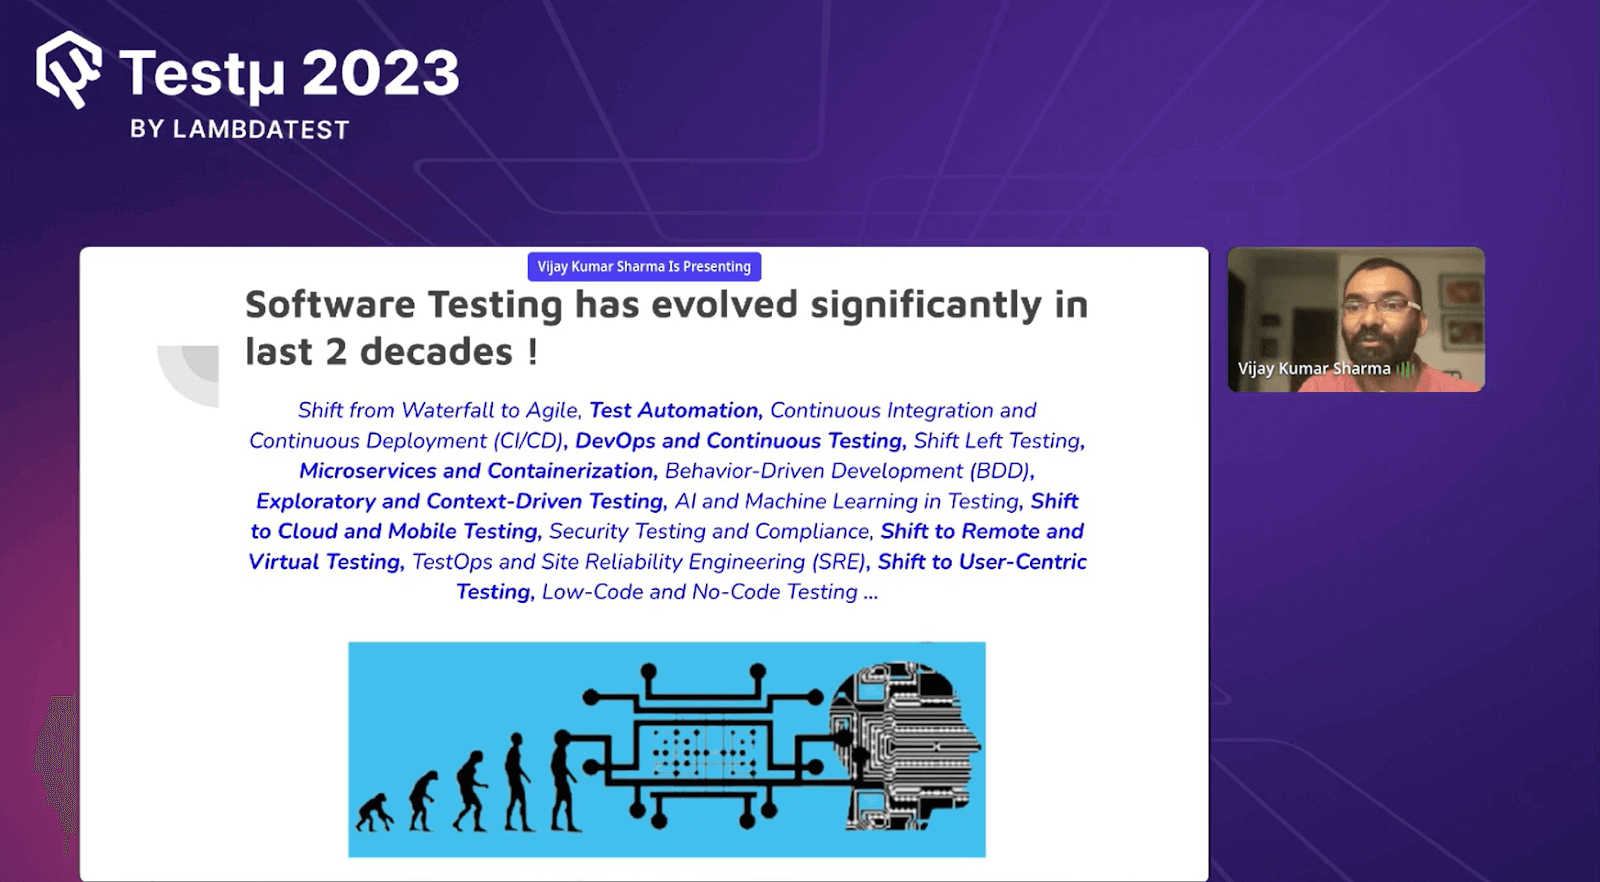 Quick view of evolution in Software Testing in the last two decades